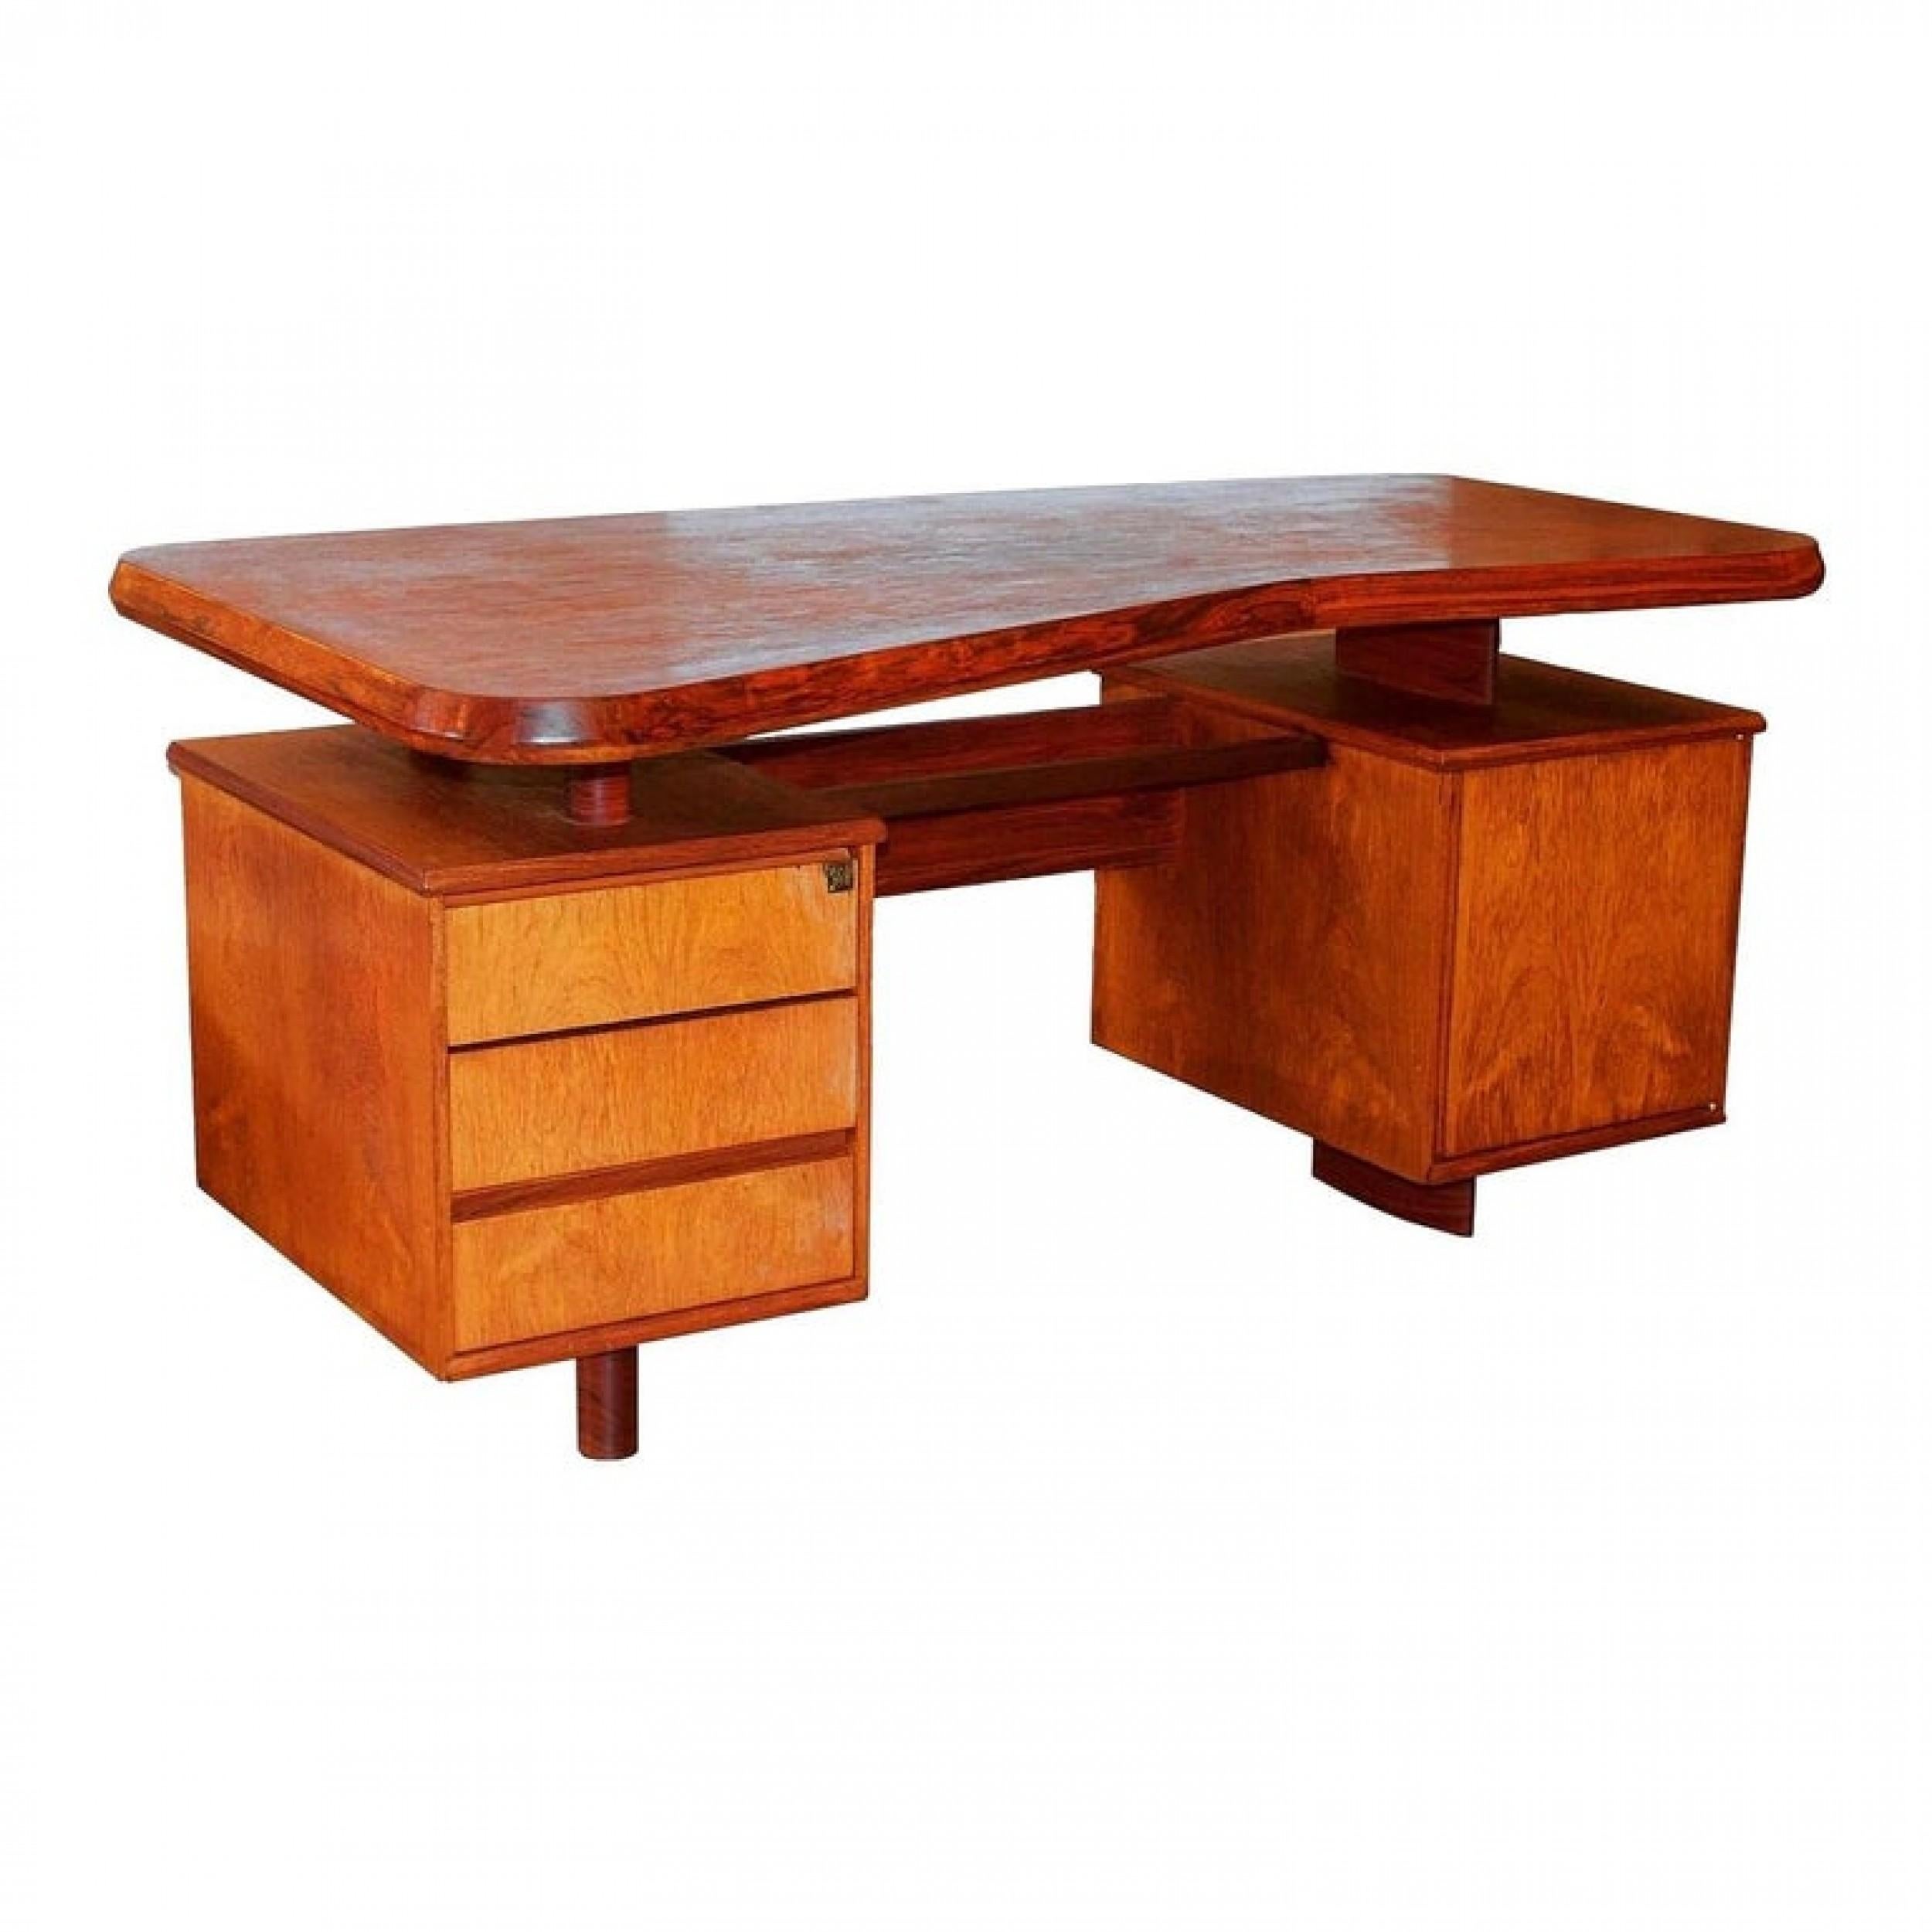 Unique French Modern Solid Rosewood Desk, Pierre Chapo, 1950s.